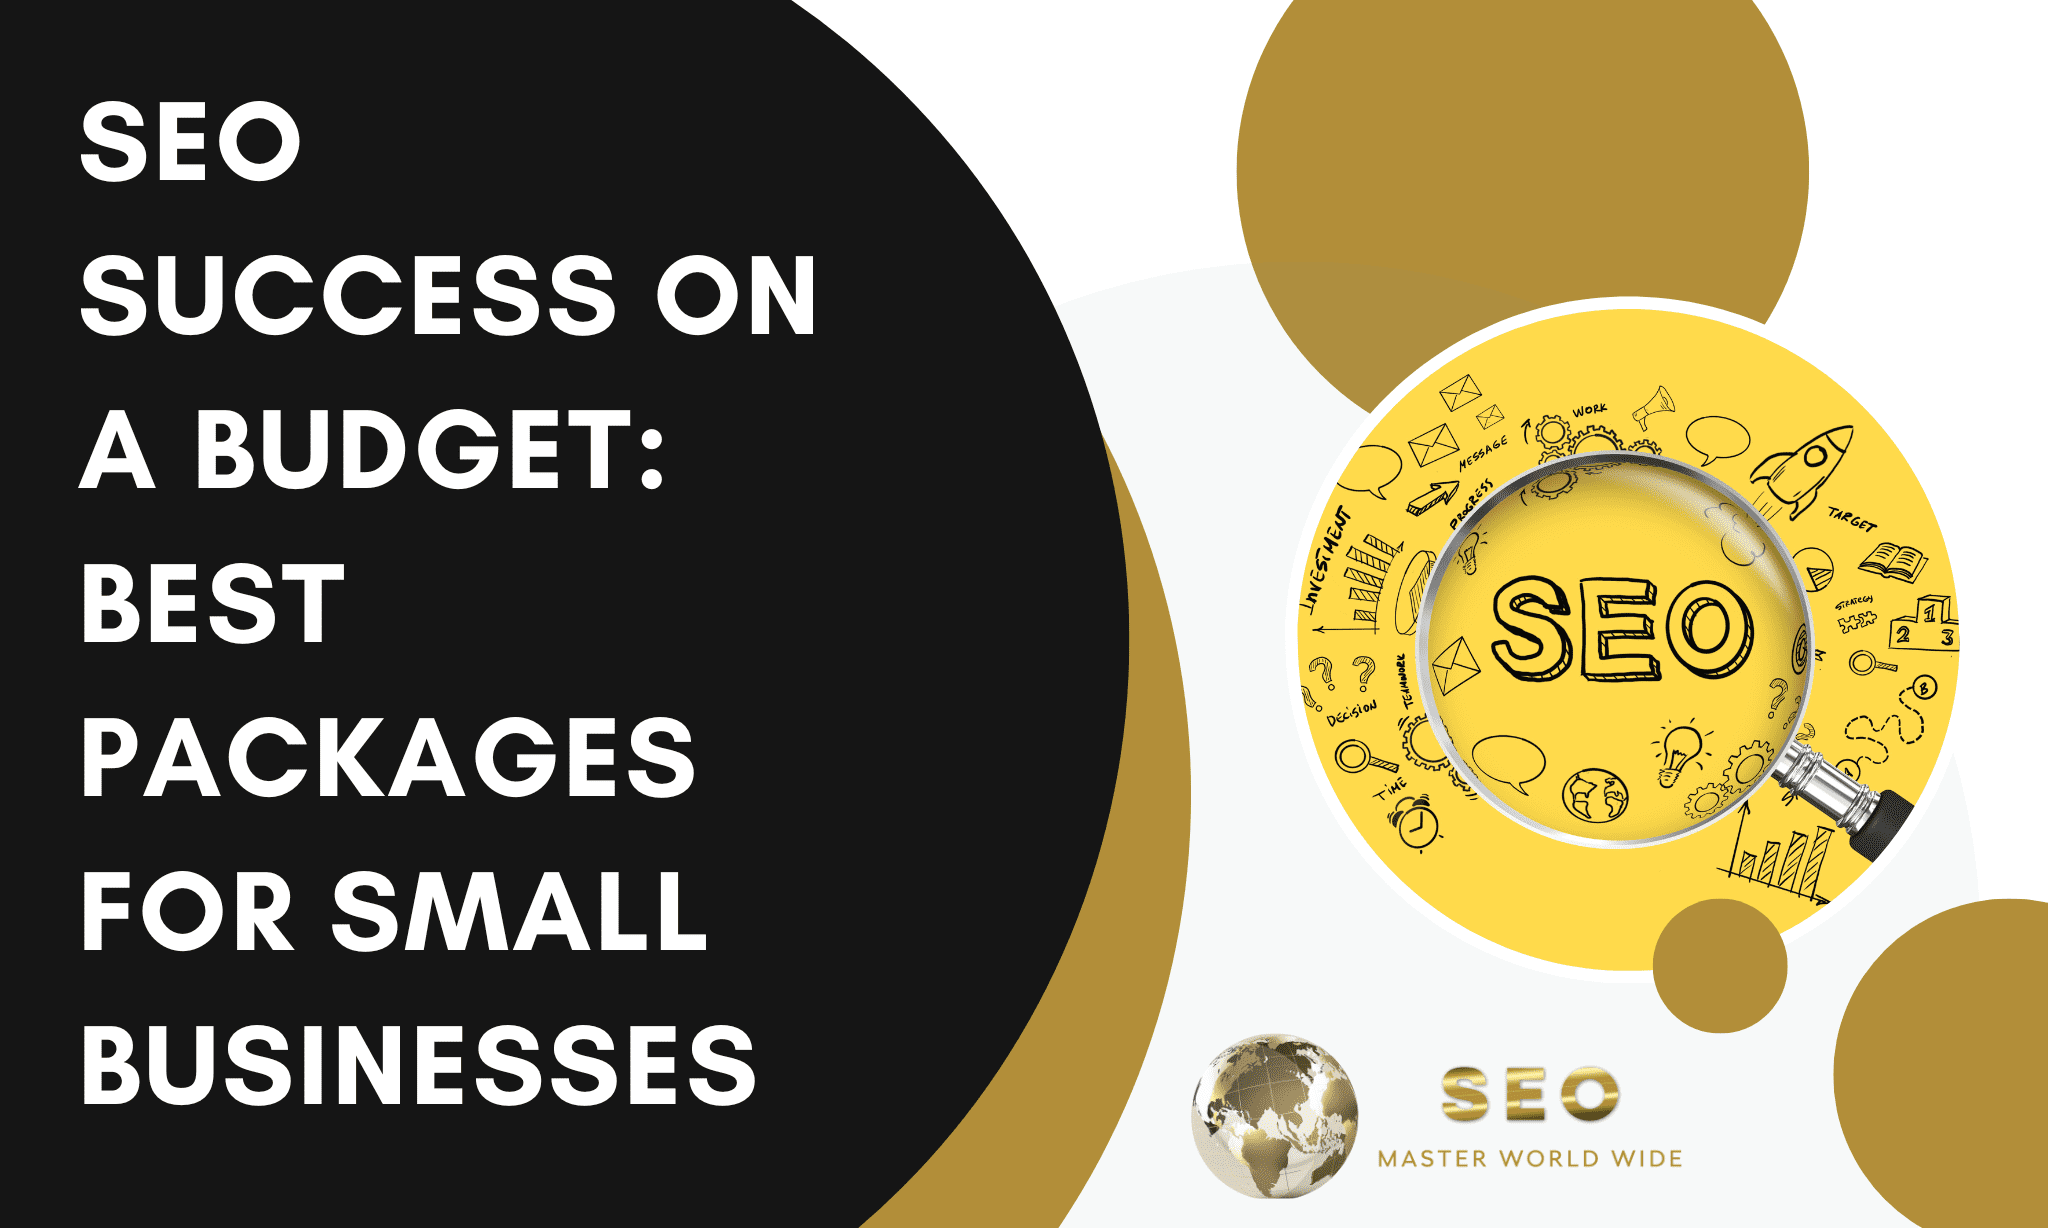 SEO Master Worldwide - SEO Services_affordable small business seo packages